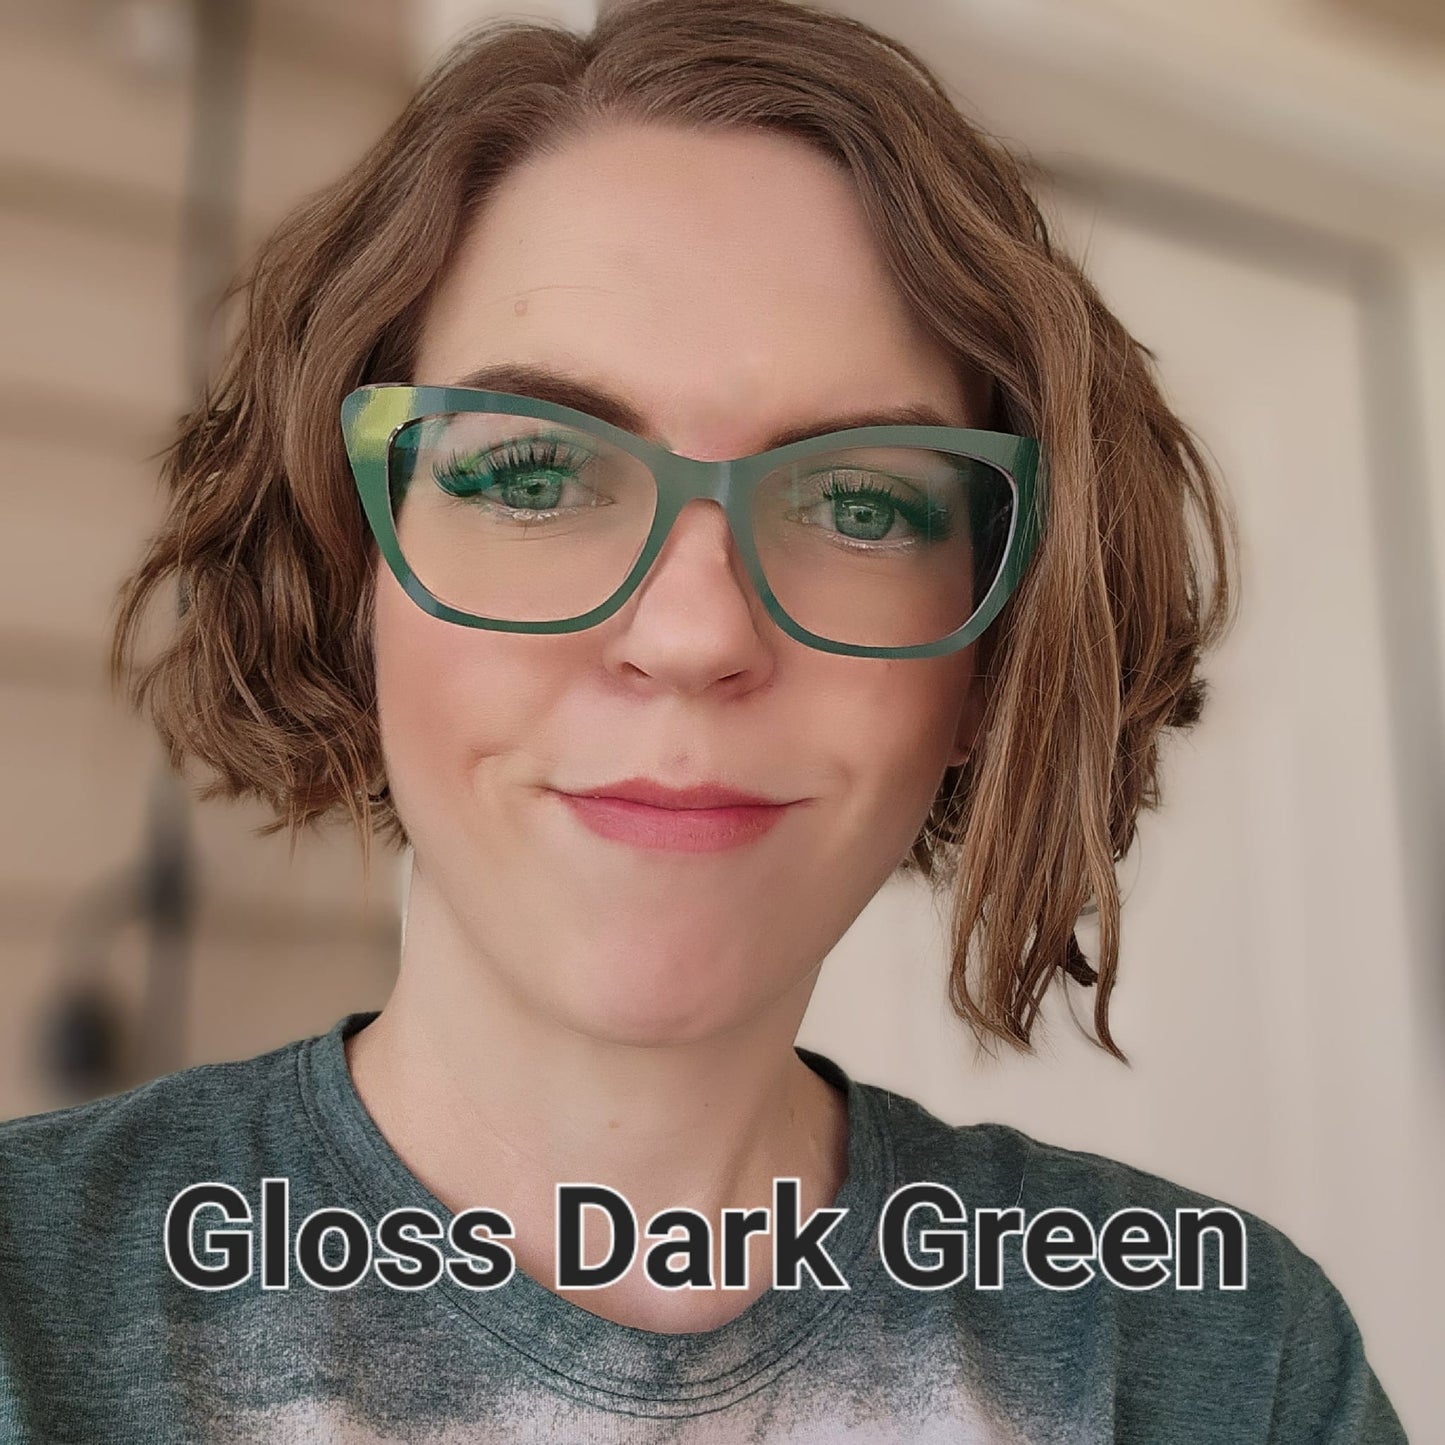 Gloss Dark Green Naked Collection - Eyeglasses Cover - Comes with Magnets